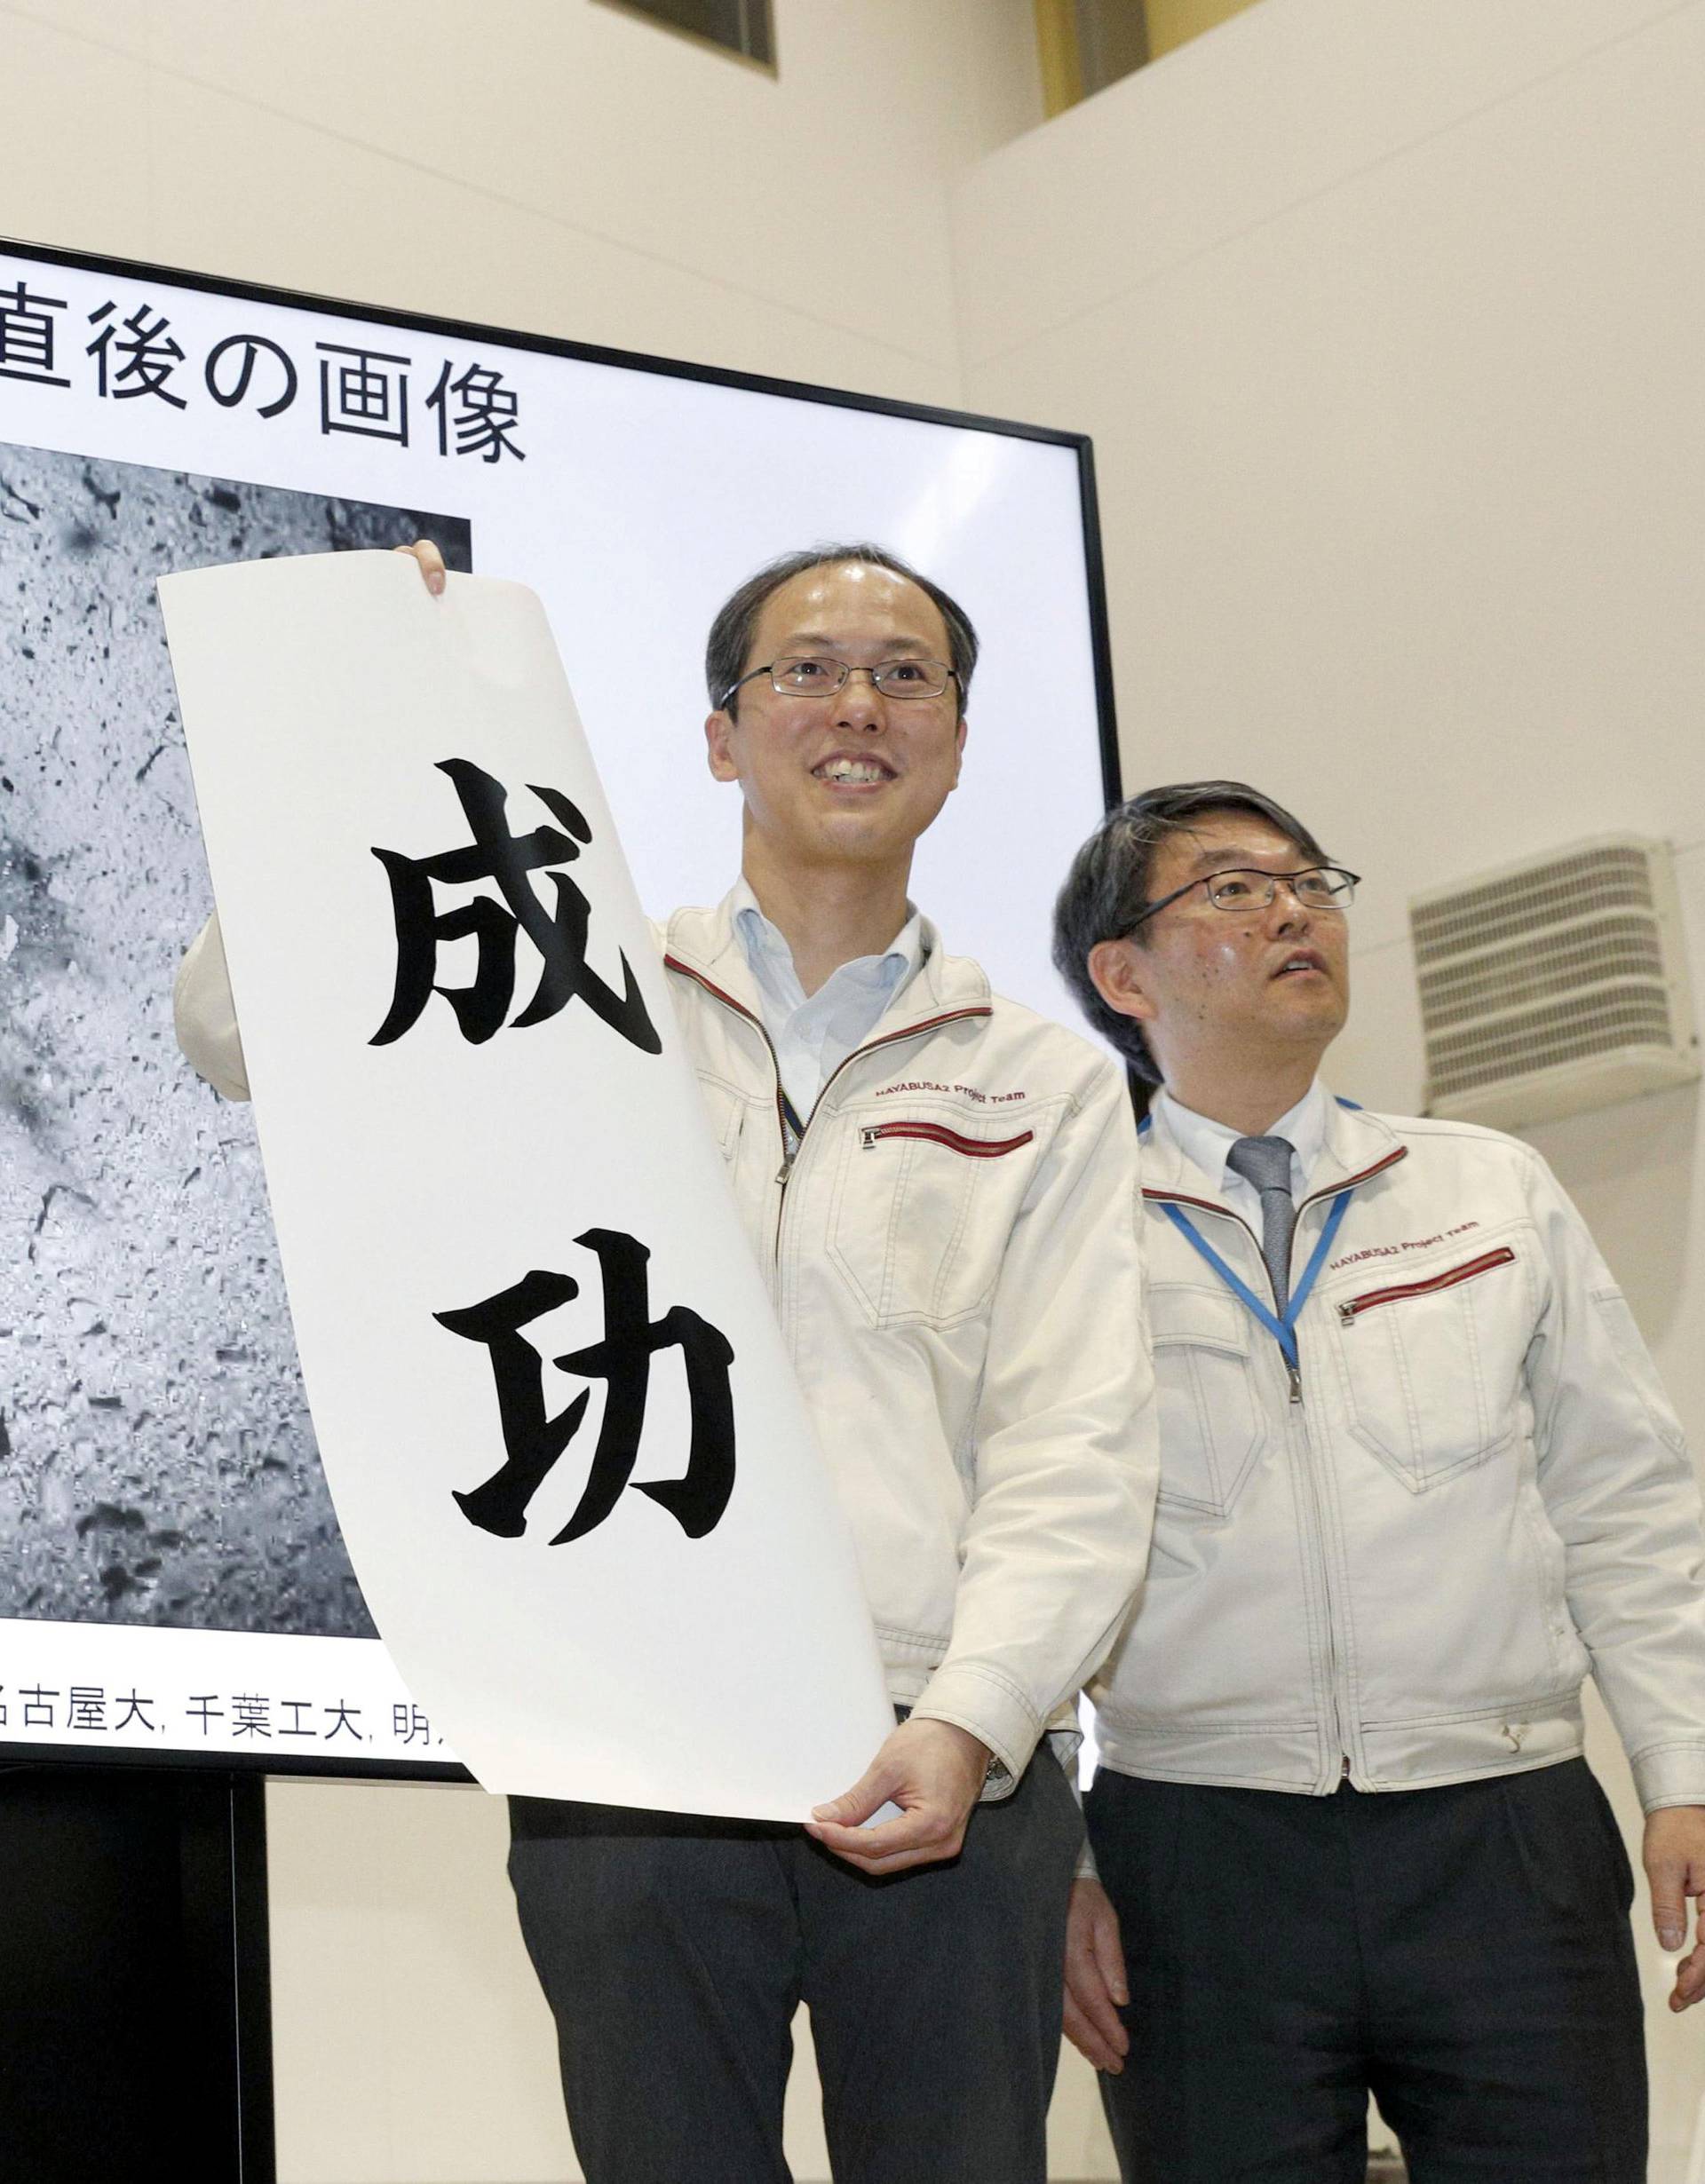 JAXA associate professor Yuichi Tsuda holds a banner reading 'success' in front of an image of the Hayabusa 2 space probe's landing on the Ryugu asteroid in Sagamihara